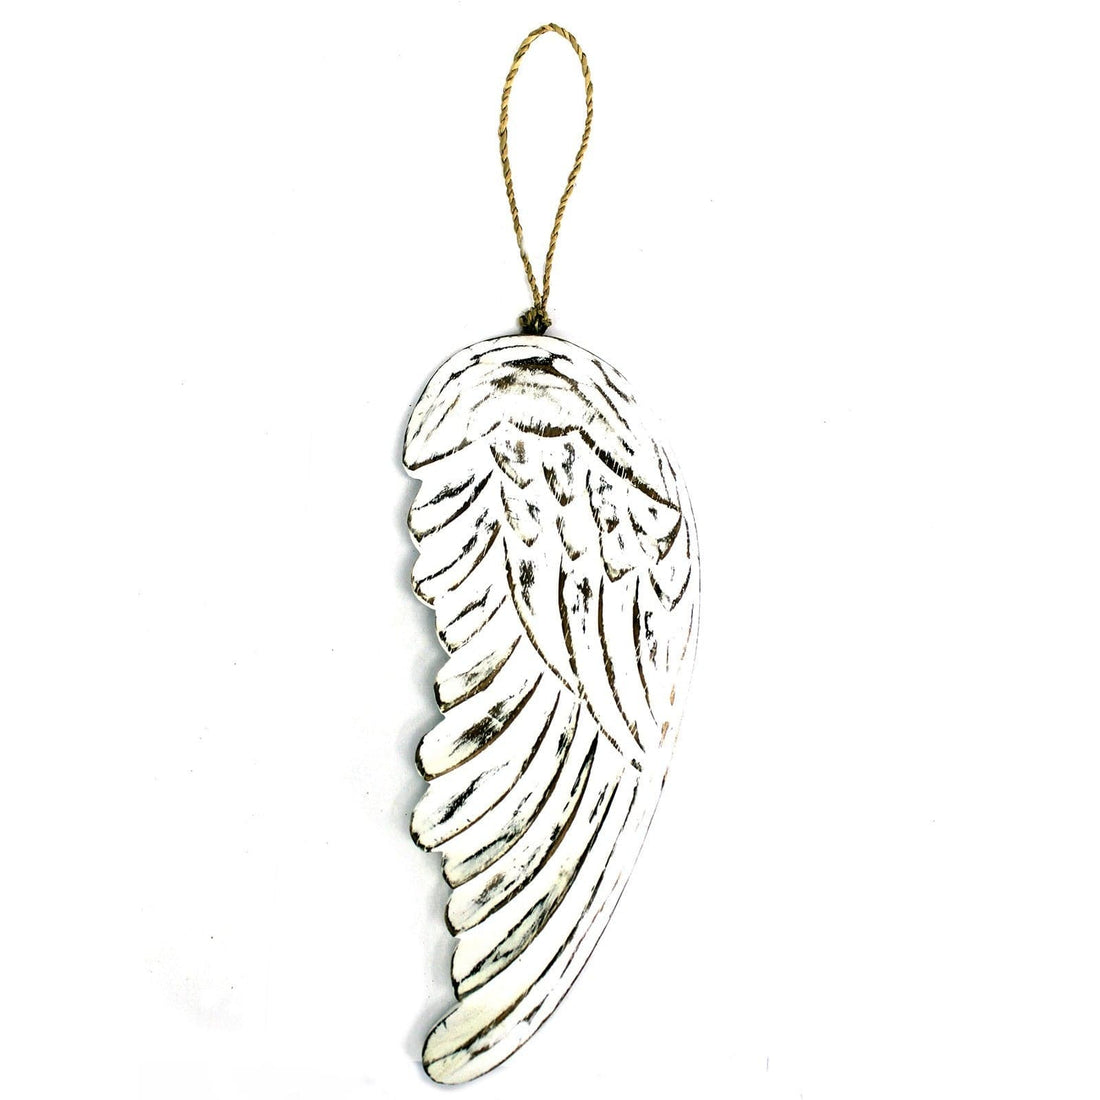 Hand Crafted Angel Wing - 30cm - best price from Maltashopper.com AWL-01